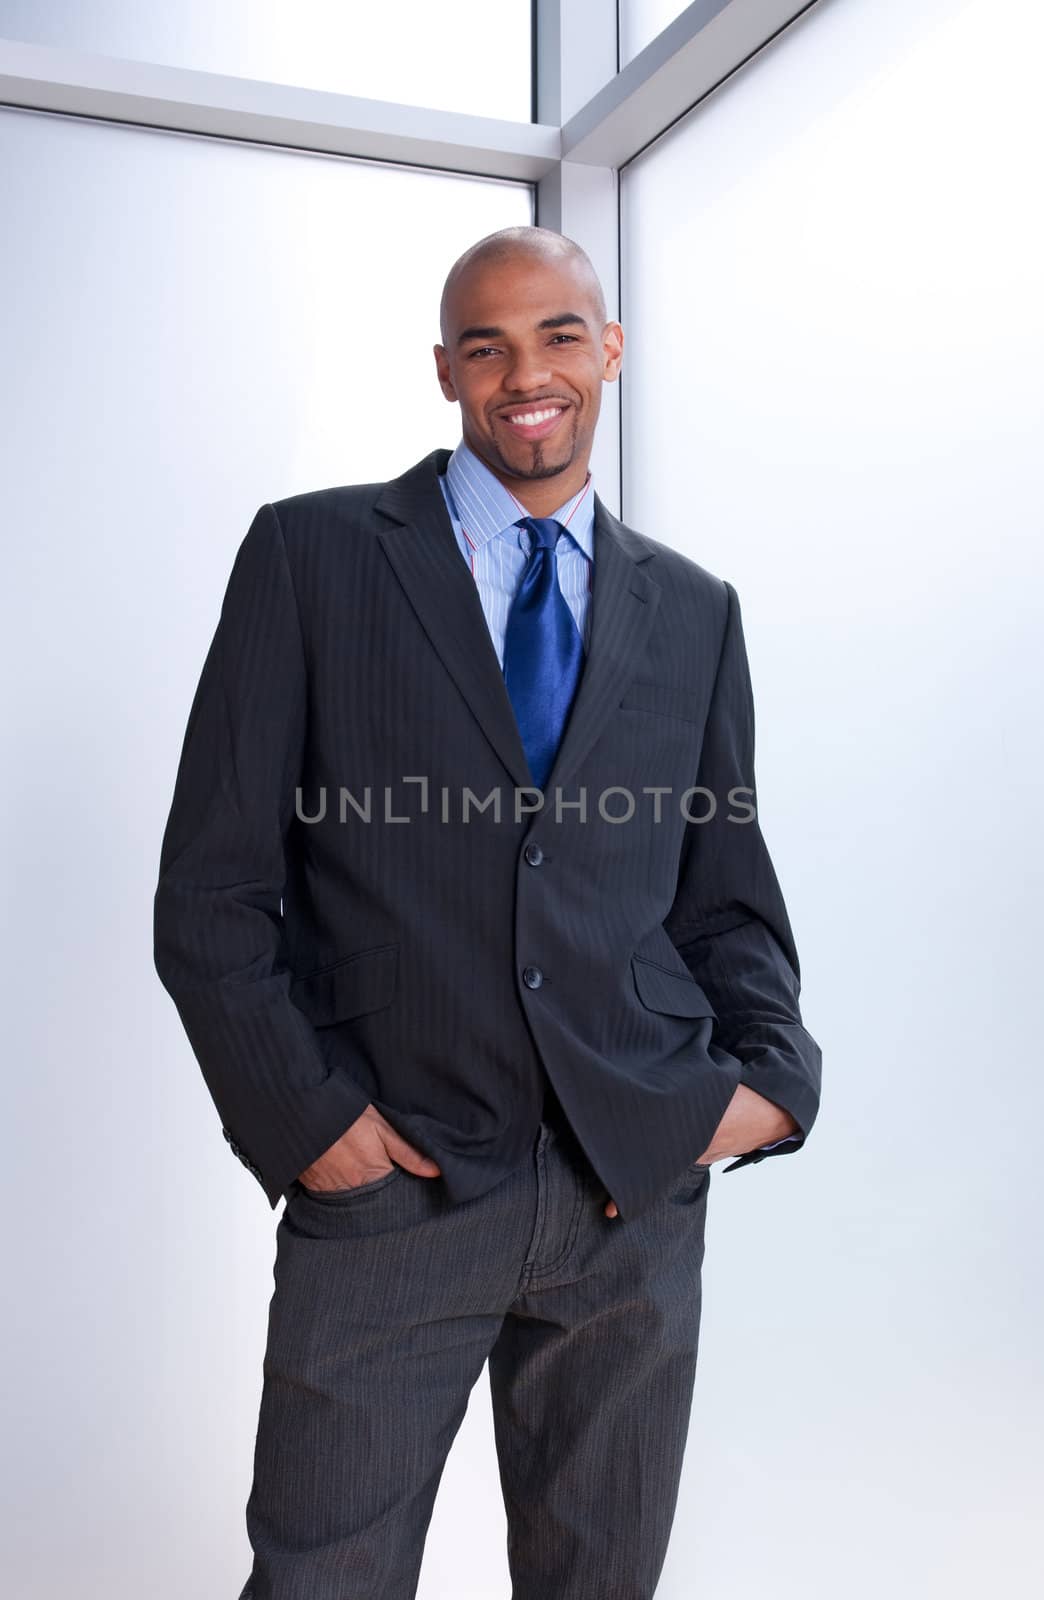 Good-looking smiling businessman standing near office window.